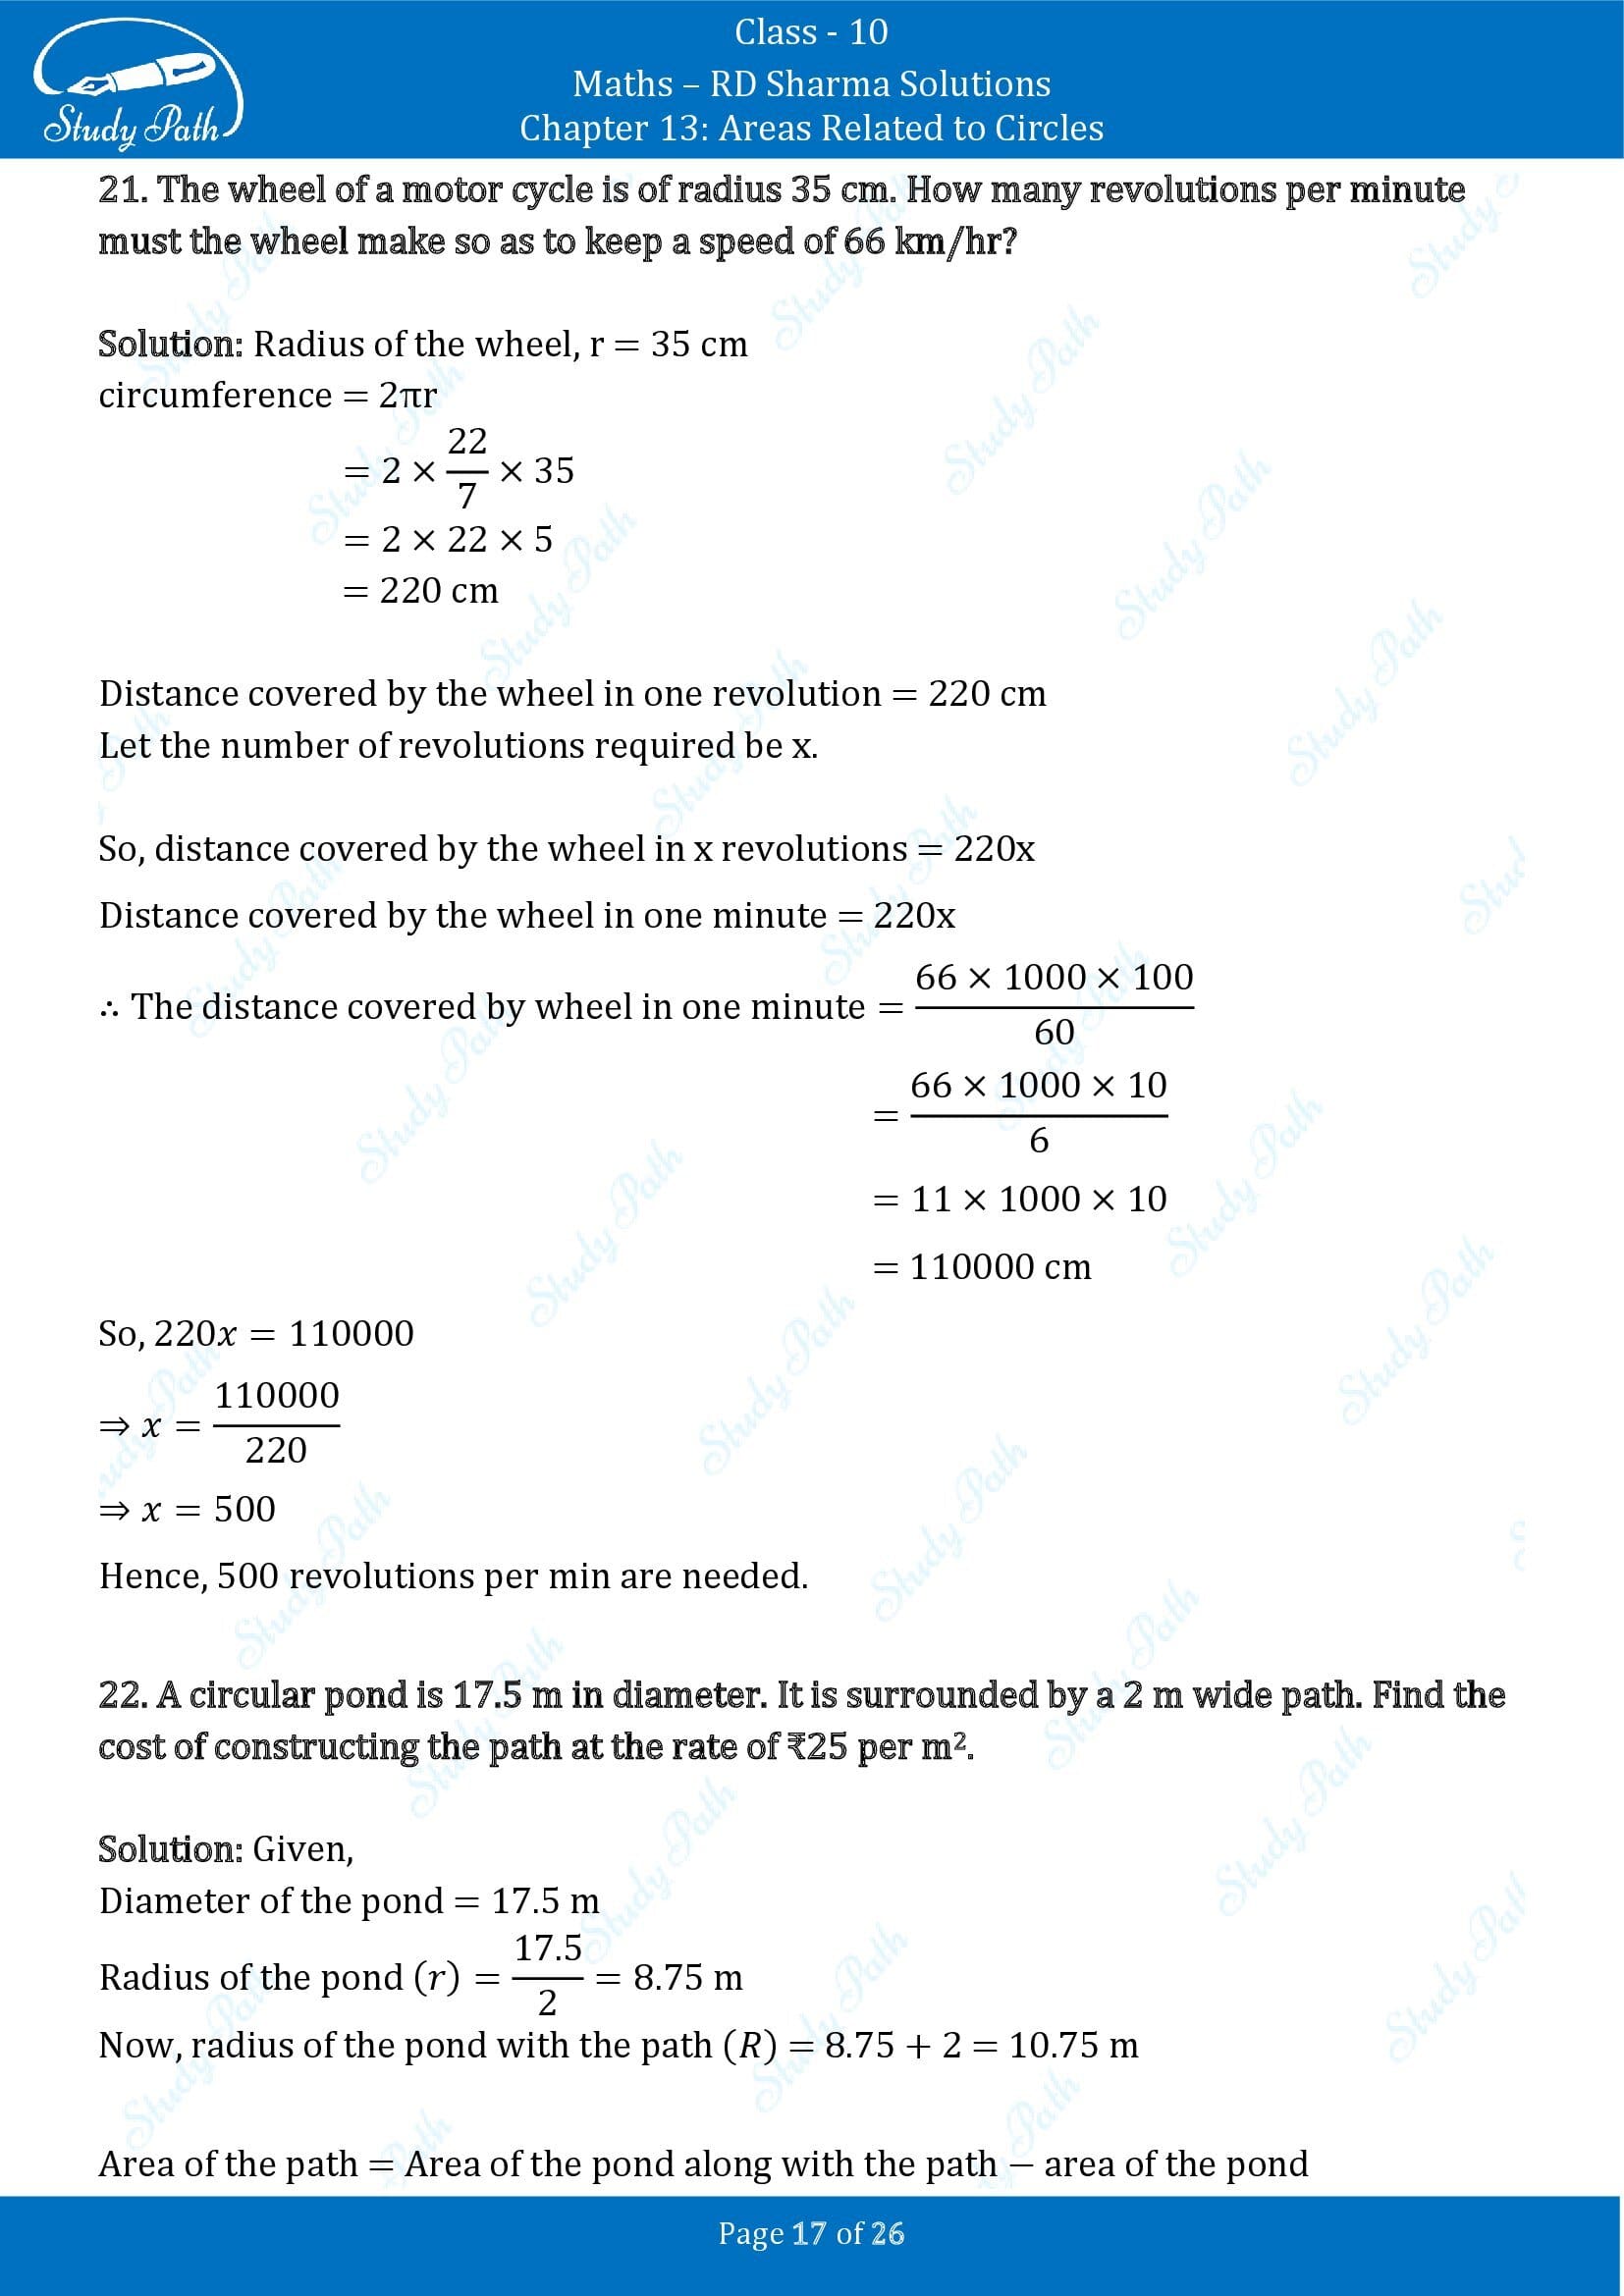 RD Sharma Solutions Class 10 Chapter 13 Areas Related to Circles Exercise 13.1 00017